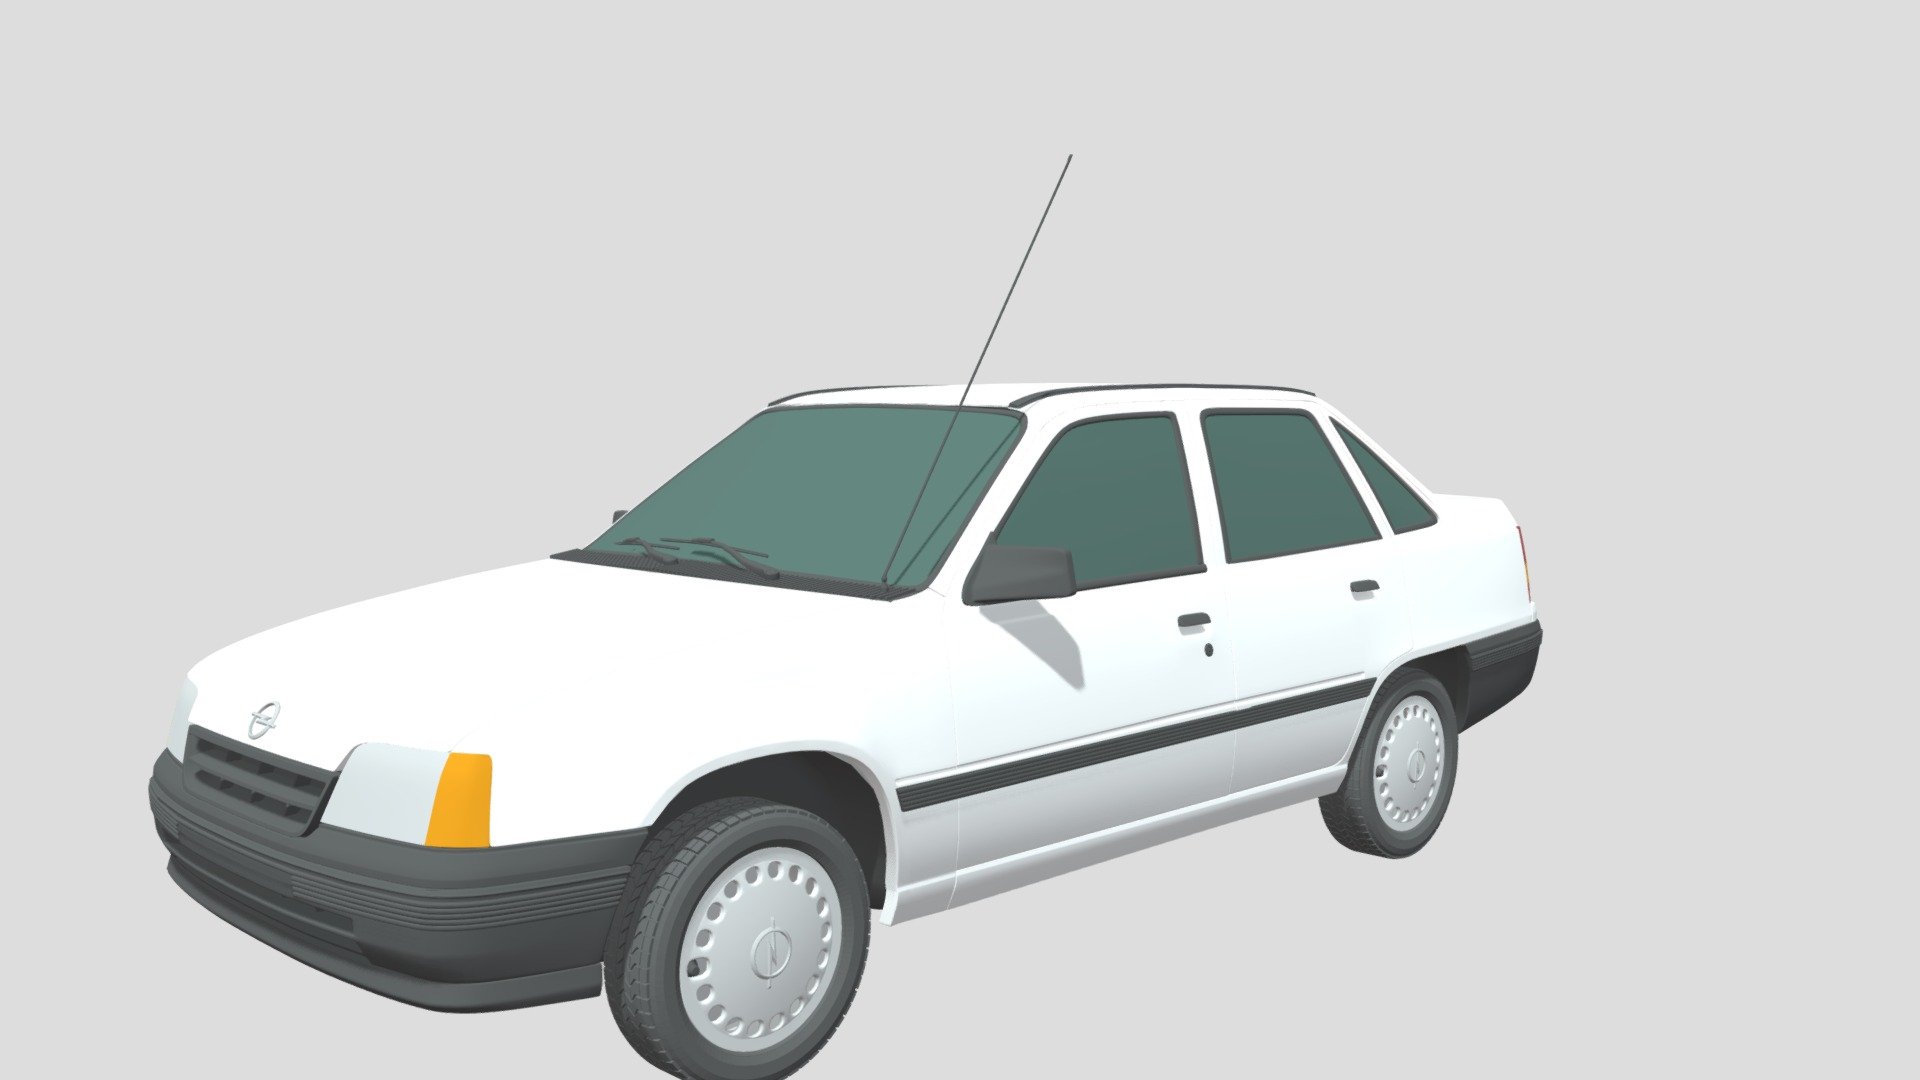 Introducing our stunning photorealistic 3D model of the Opel Kadett E Sedan (1991) car, a true masterpiece of digital craftsmanship that will elevate your projects to the next level. This meticulously crafted model captures every curve, detail, and essence of a real Opel Kadett E Sedan (1991) car, providing you with unparalleled realism and versatility for your creative endeavors.

Our photorealistic 3D model of the Opel Kadett E Sedan (1991) car is a testament to precision and attention to detail. Each contour, from the sleek body lines to the intricacies of the headlights and tail lights, has been painstakingly recreated to mirror the elegance and realism of a genuine Opel Kadett E Sedan (1991) automobile. Whether you're an automotive designer, a video game developer, or a filmmaker, this 3D model will bring your visions to life with exceptional fidelity 3d model